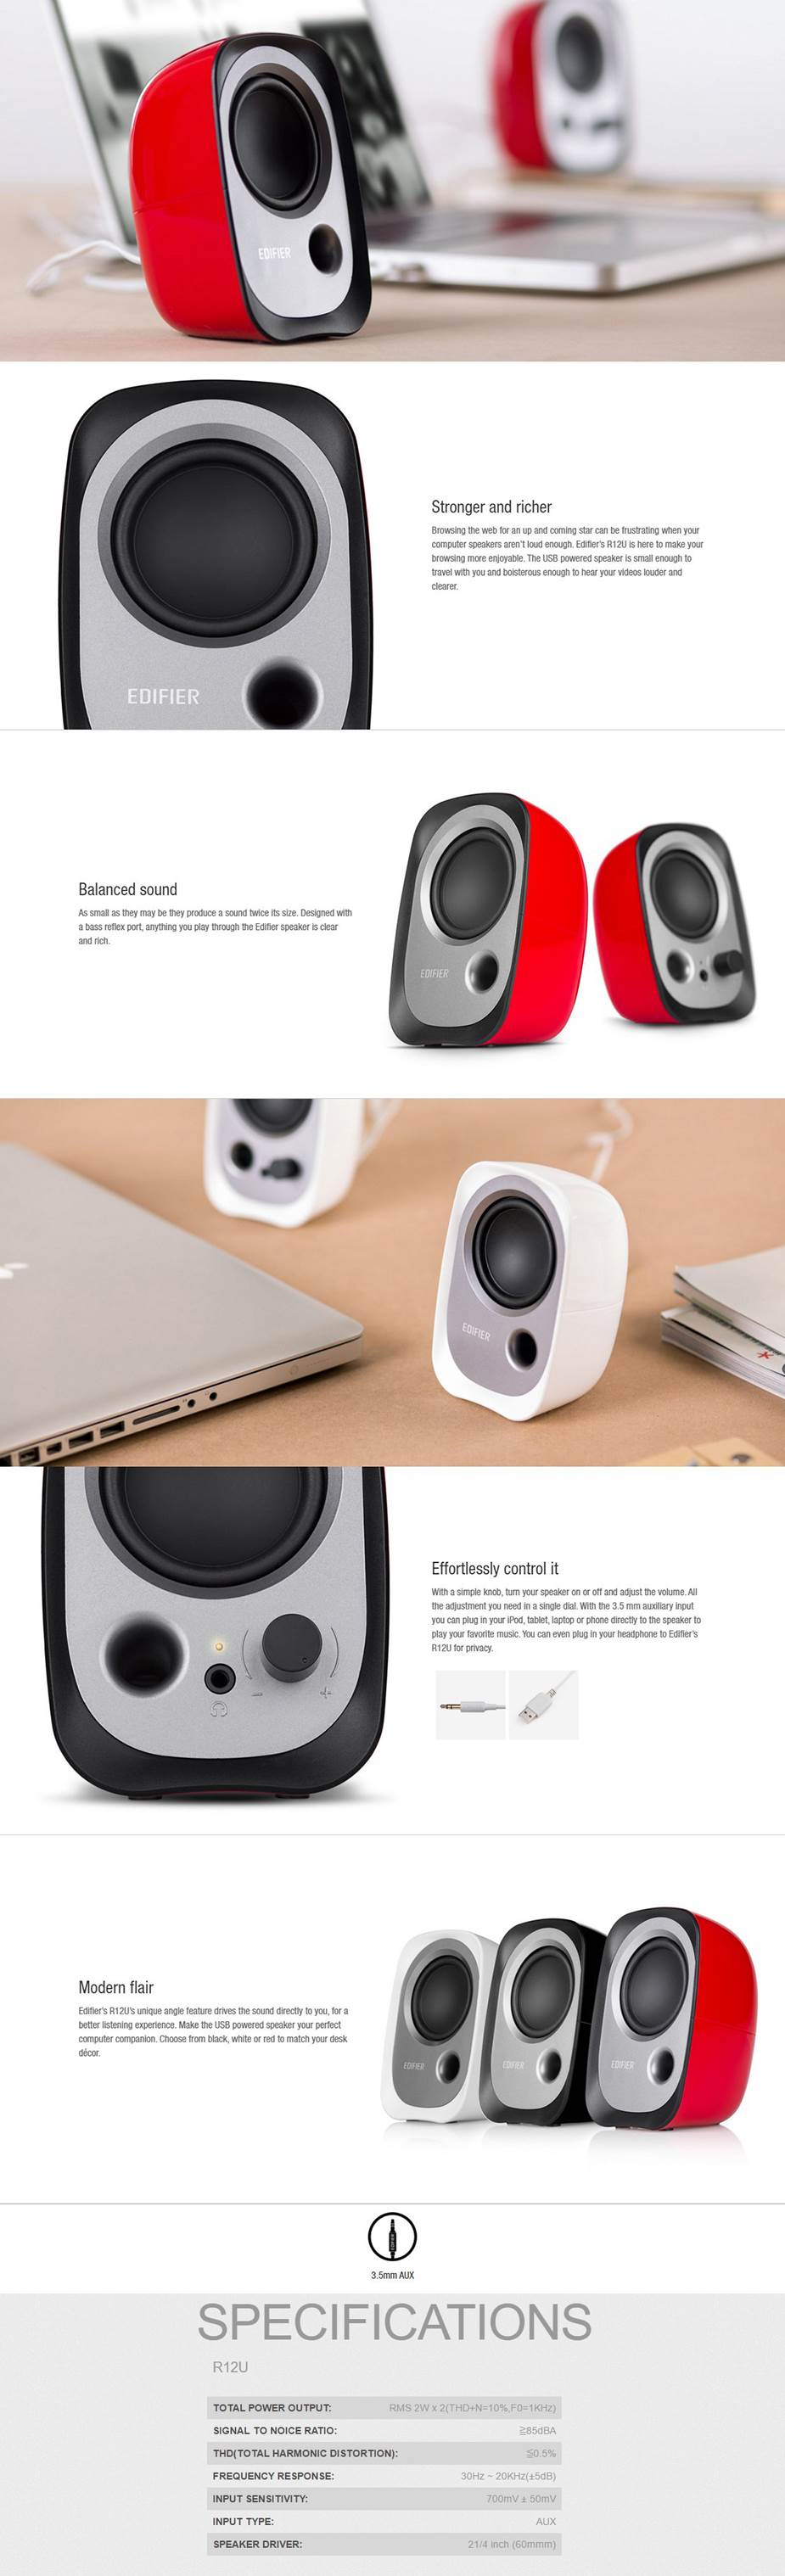 A large marketing image providing additional information about the product Edifier R12U 2.0 USB Speakers White - Additional alt info not provided